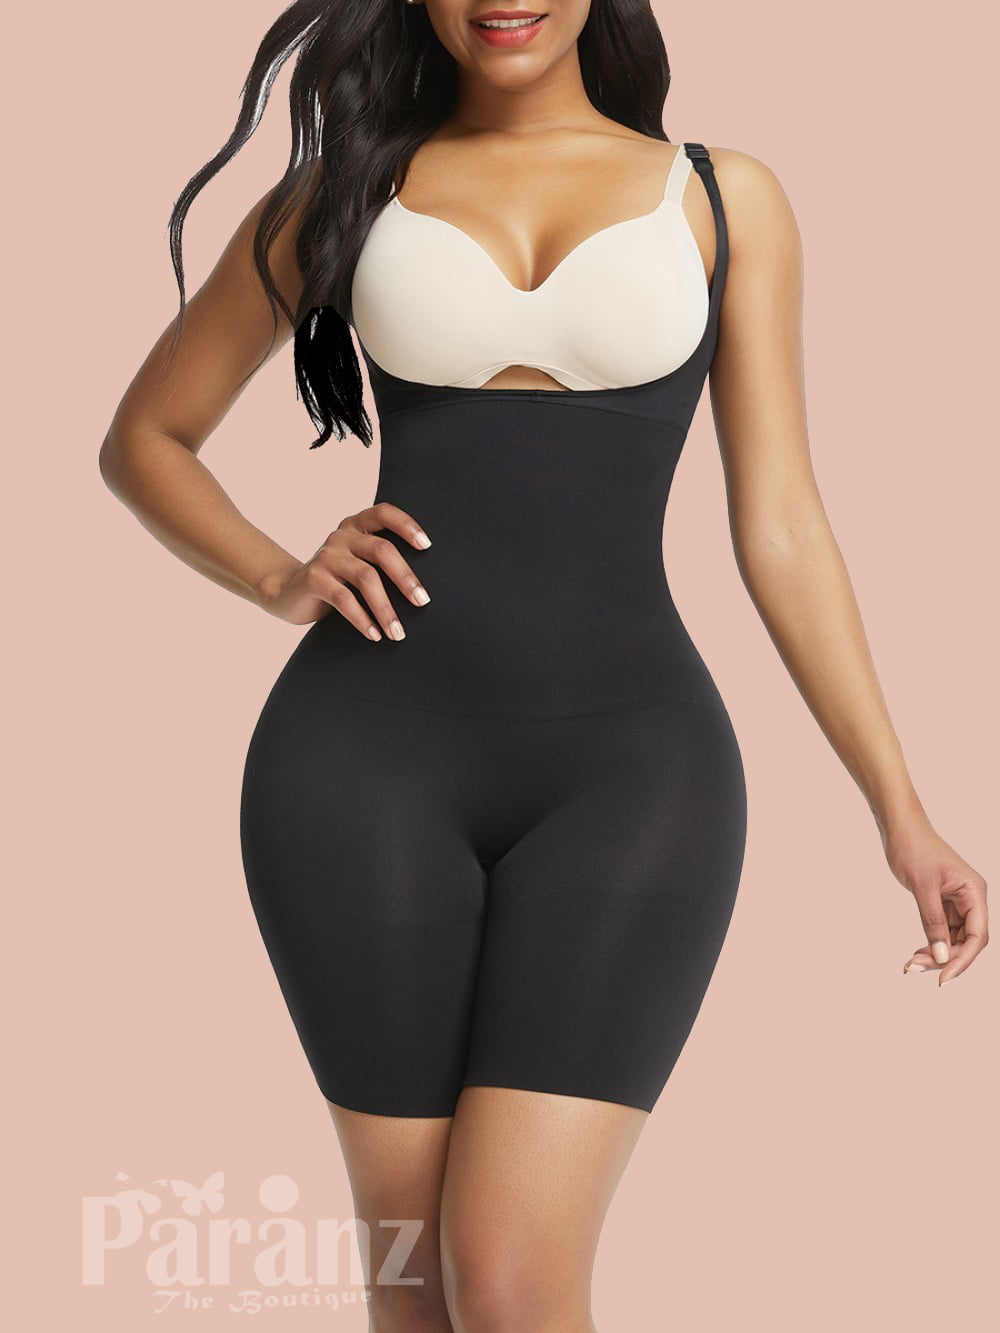 Body Suit For Women Bodysuit Anti-Slip Grip Lining Silicone Band Adjustable  Straps Shapes Curves Seamless Camisole 